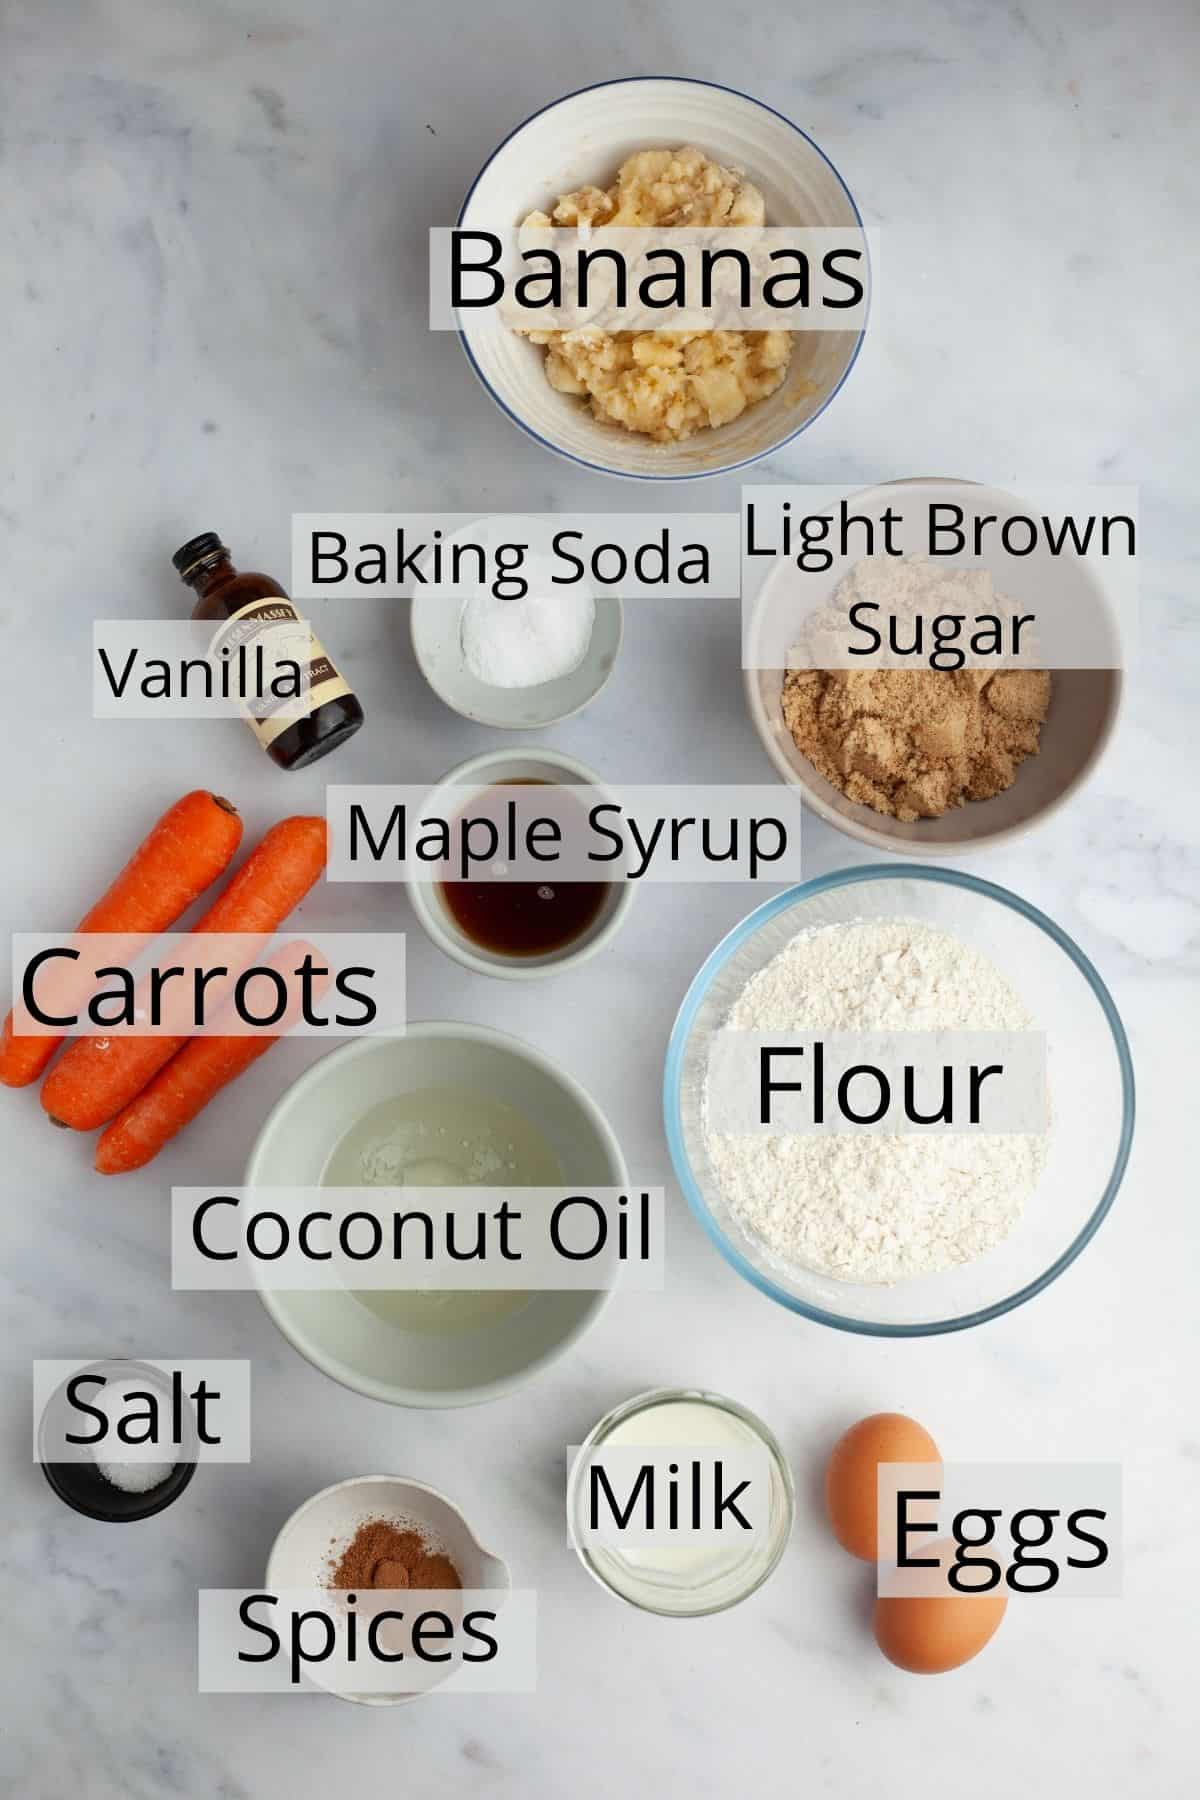 All the ingredients for banana carrot muffins weighed out into small bowls.